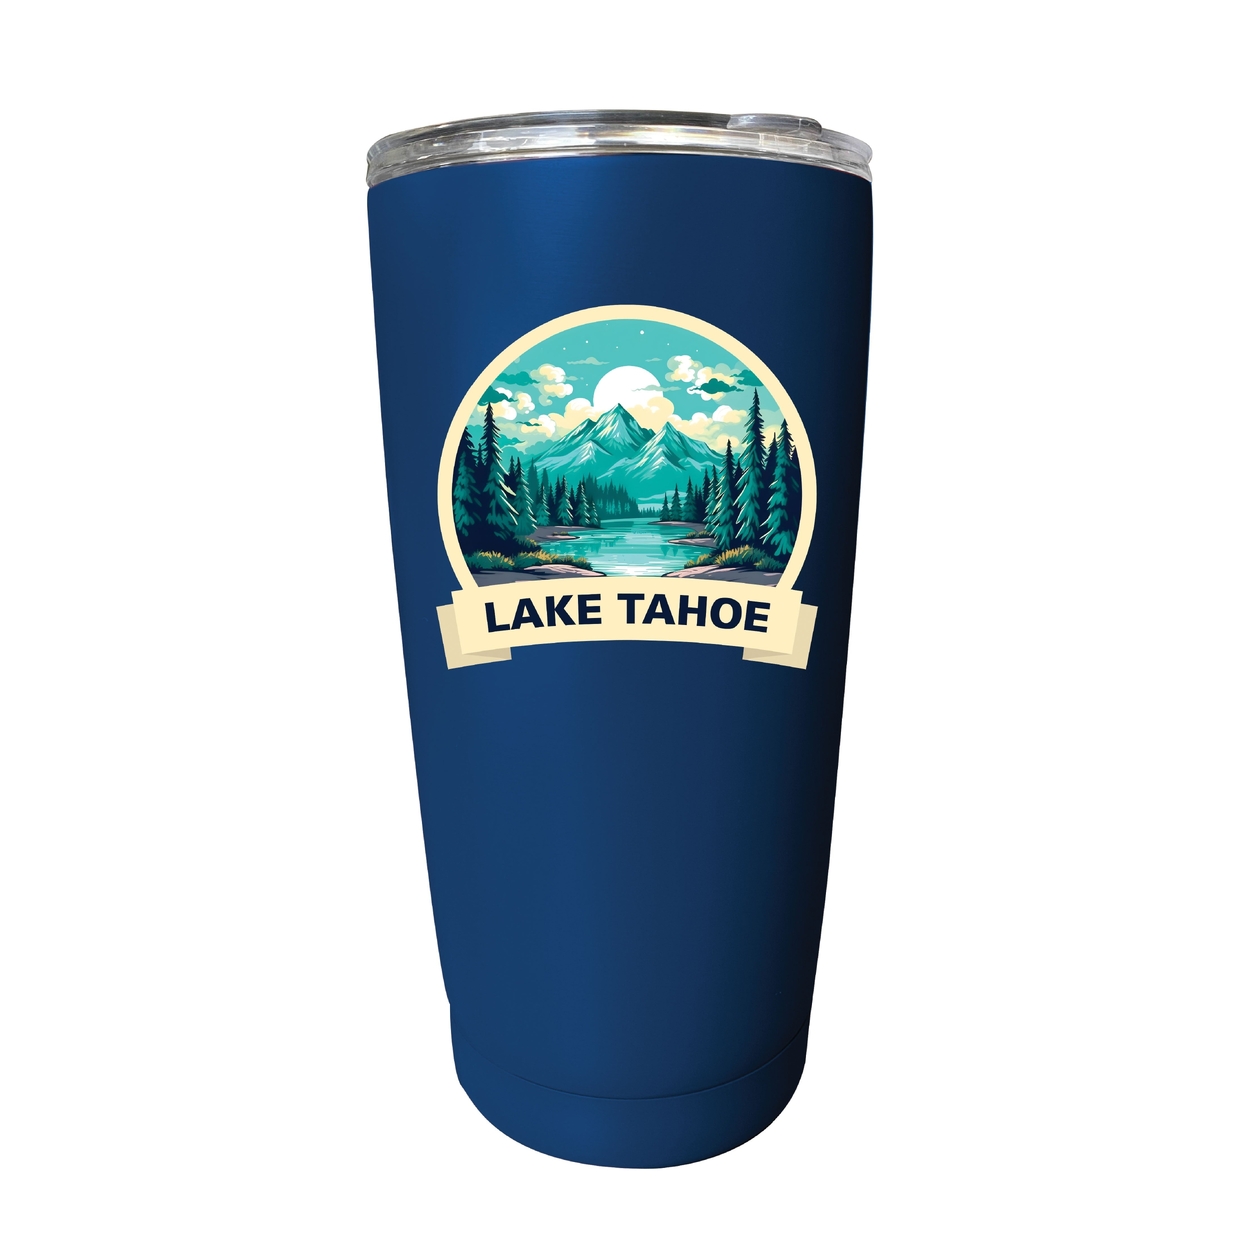 Lake Tahoe California Souvenir 16 Oz Stainless Steel Insulated Tumbler - Navy,,4-Pack